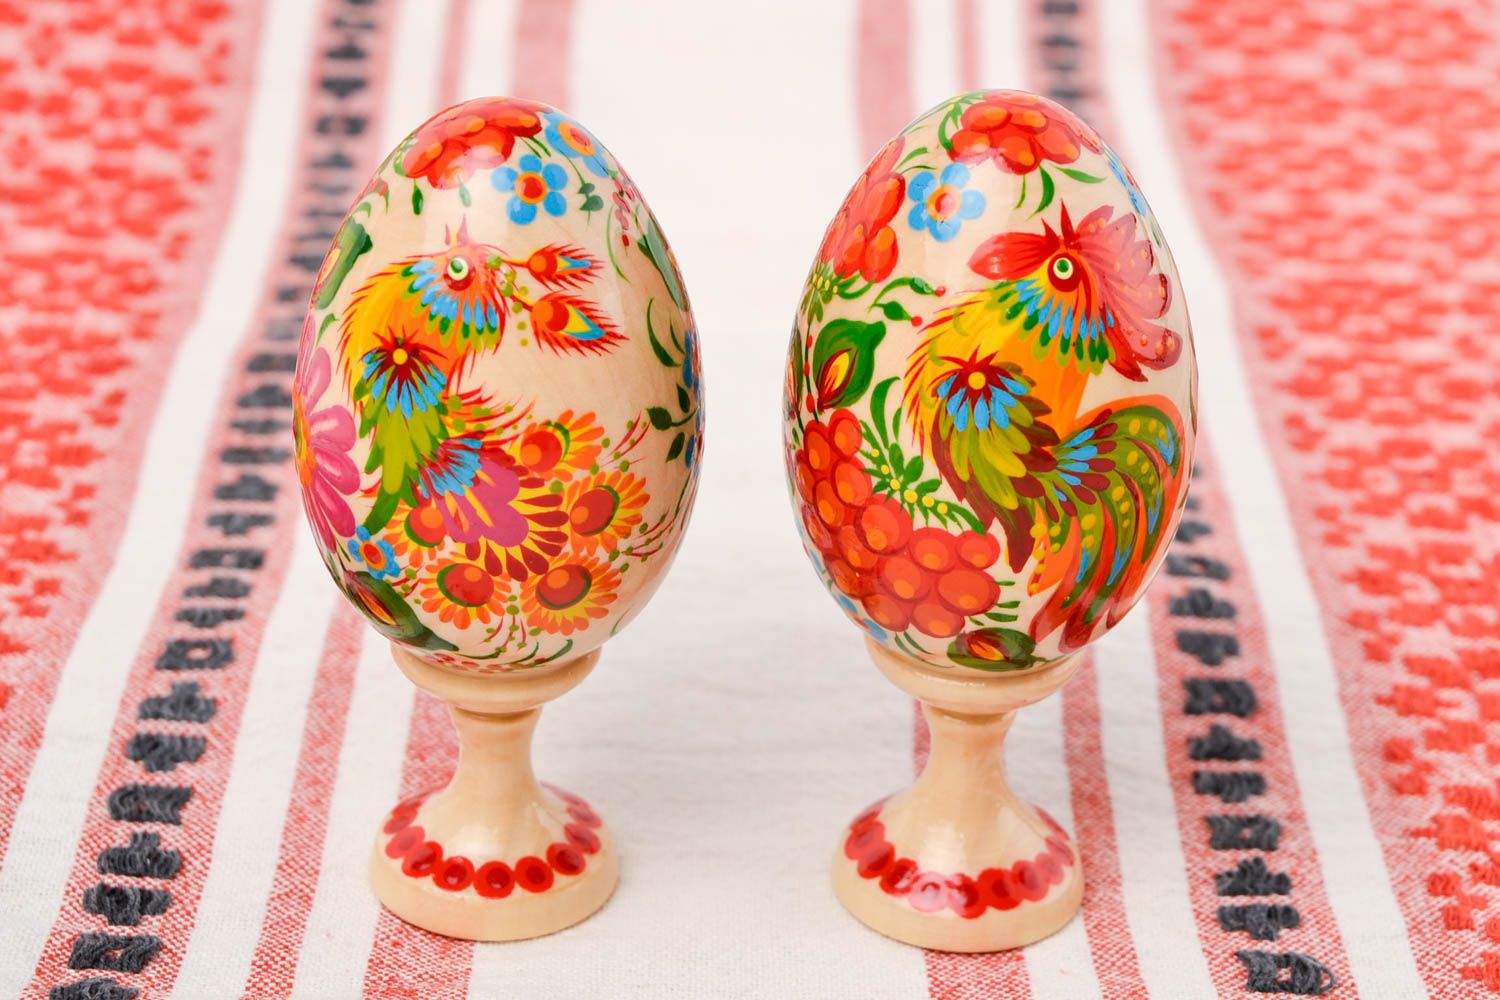 Handmade wooden Easter egg 2 Easter eggs interior decorating decorative use only photo 1